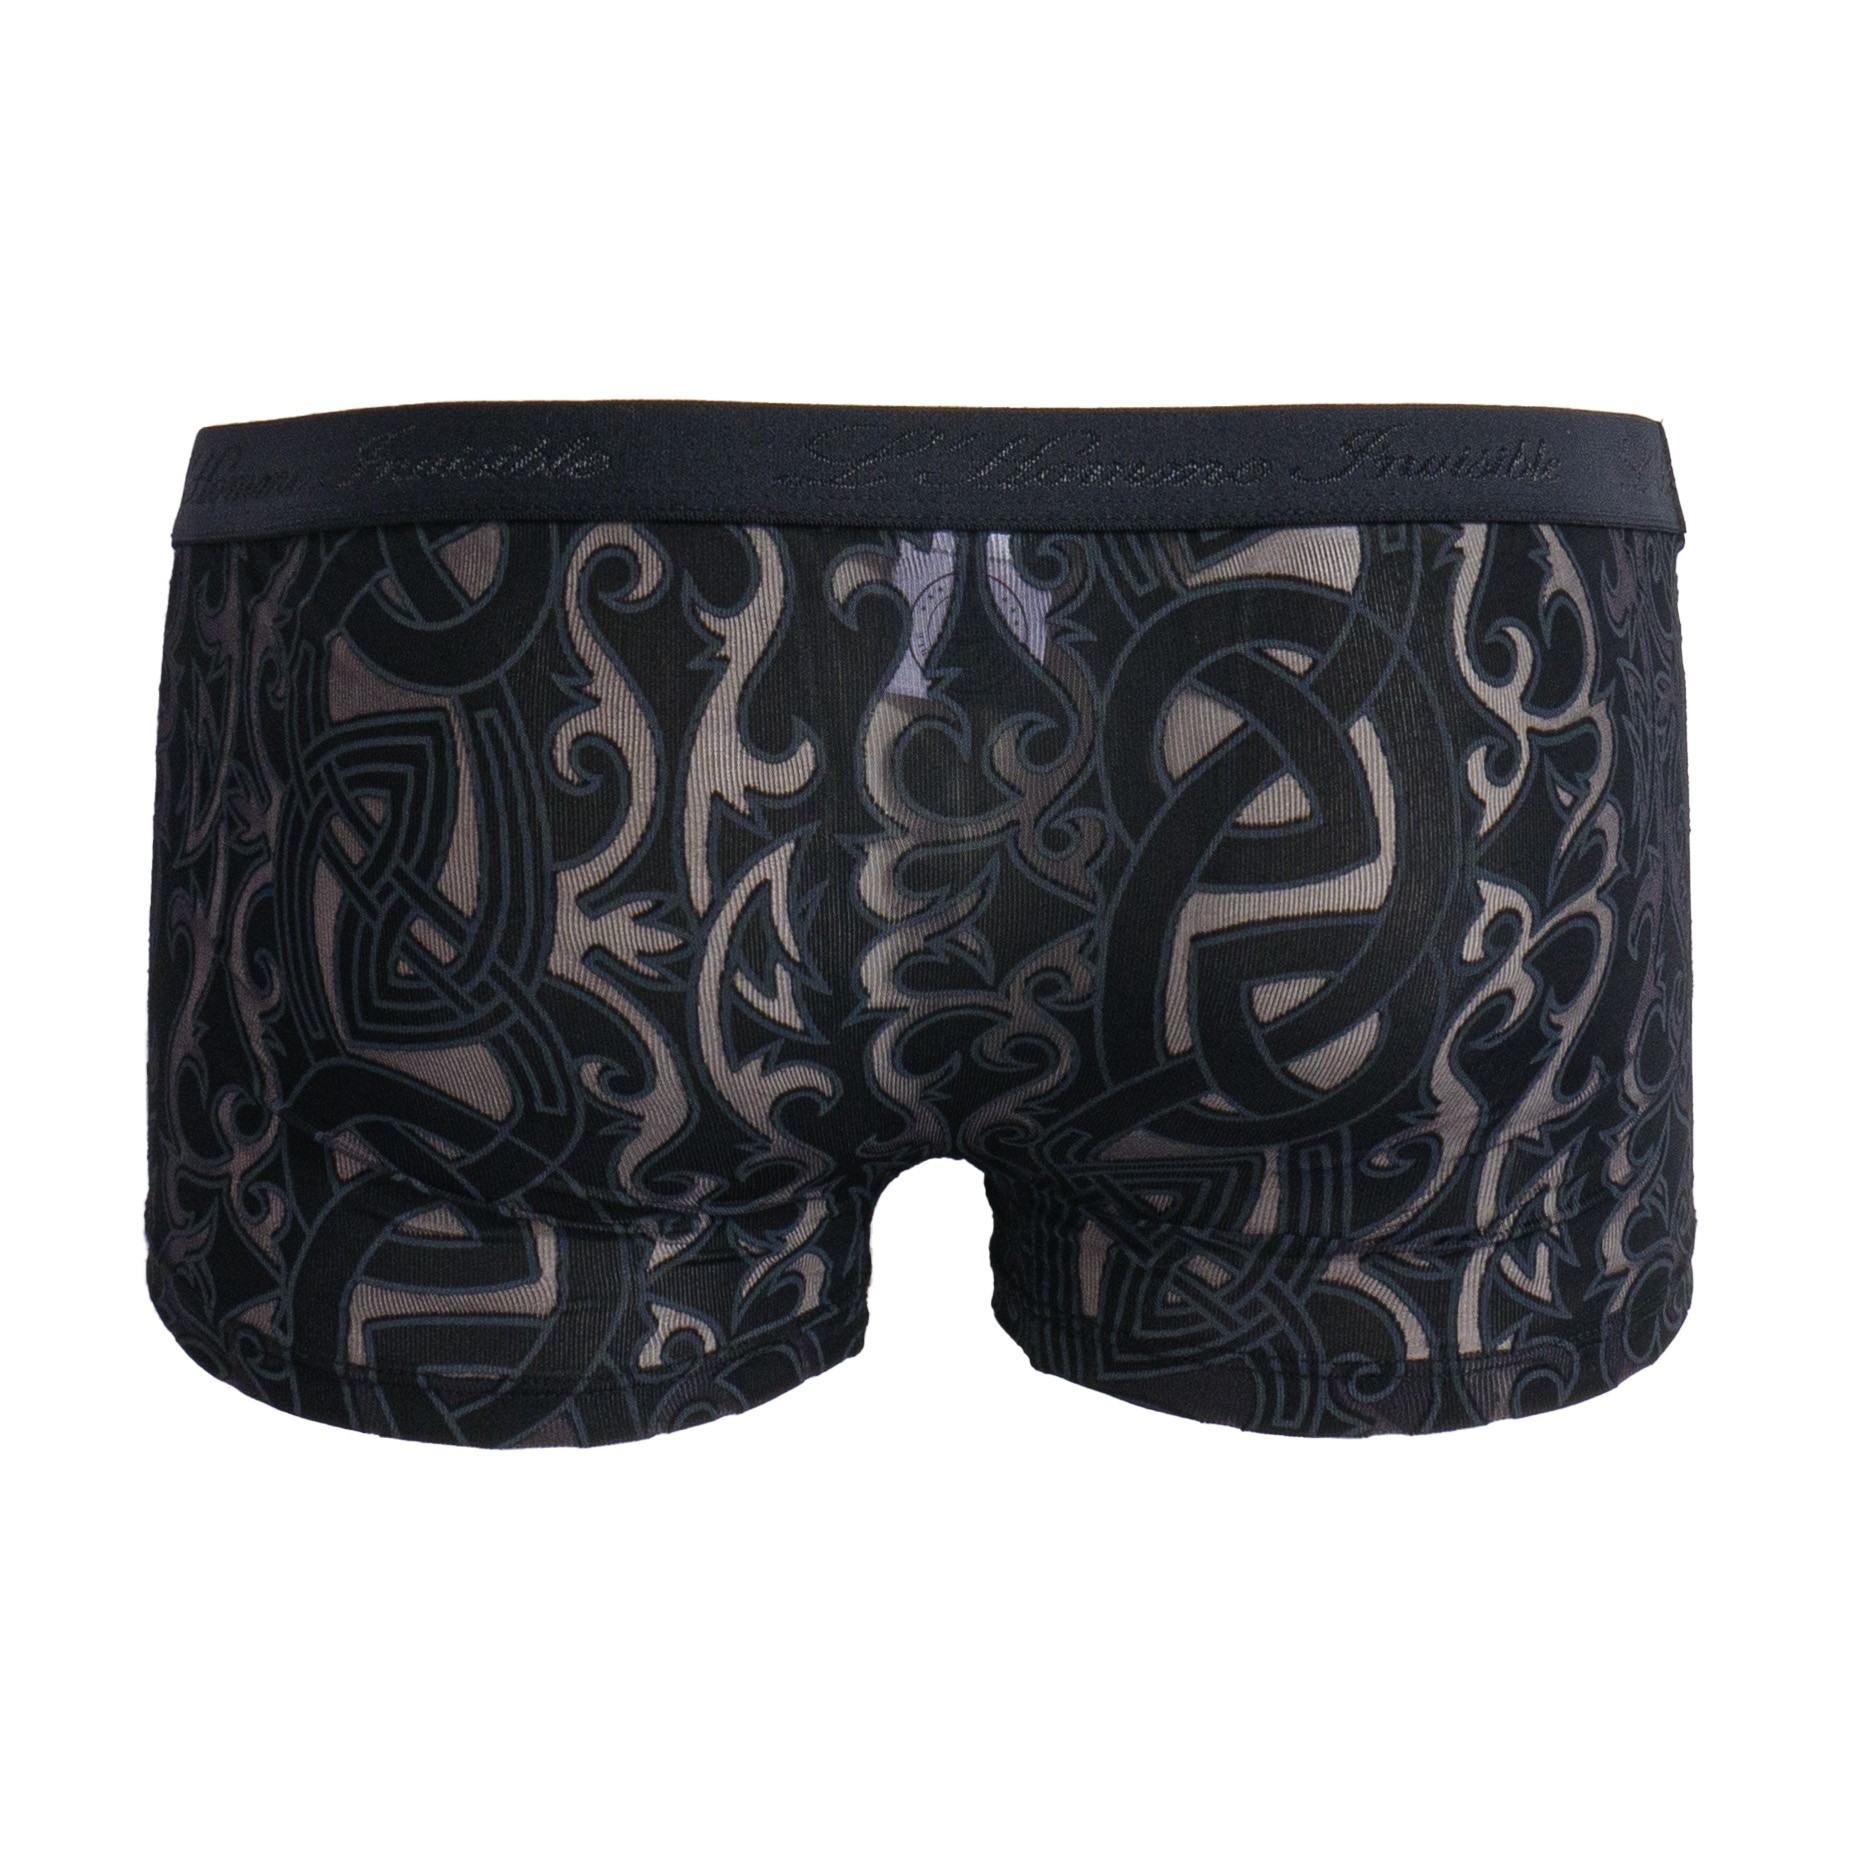 Dévoré Tattoo - Hipster Push-Up: Boxers for man brand L'Homme Invis